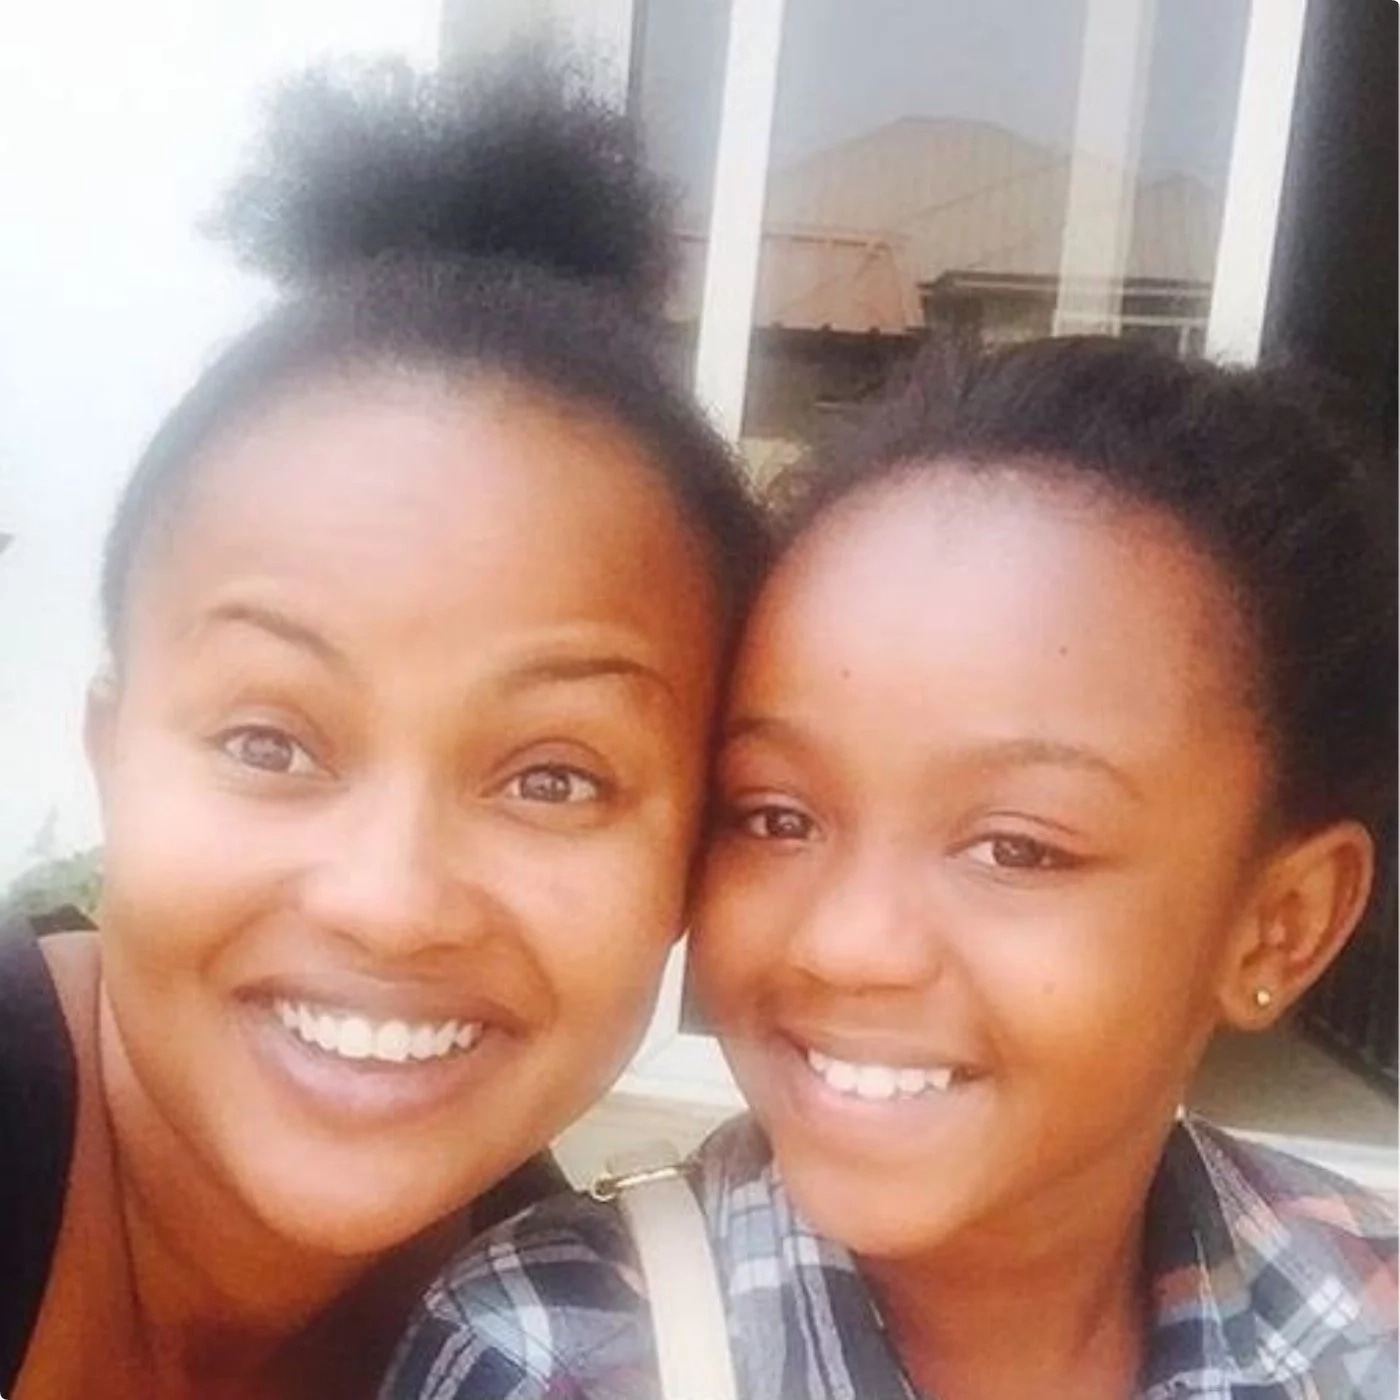 Nana Ama McBrown captured in heartwarming moment with her daughter